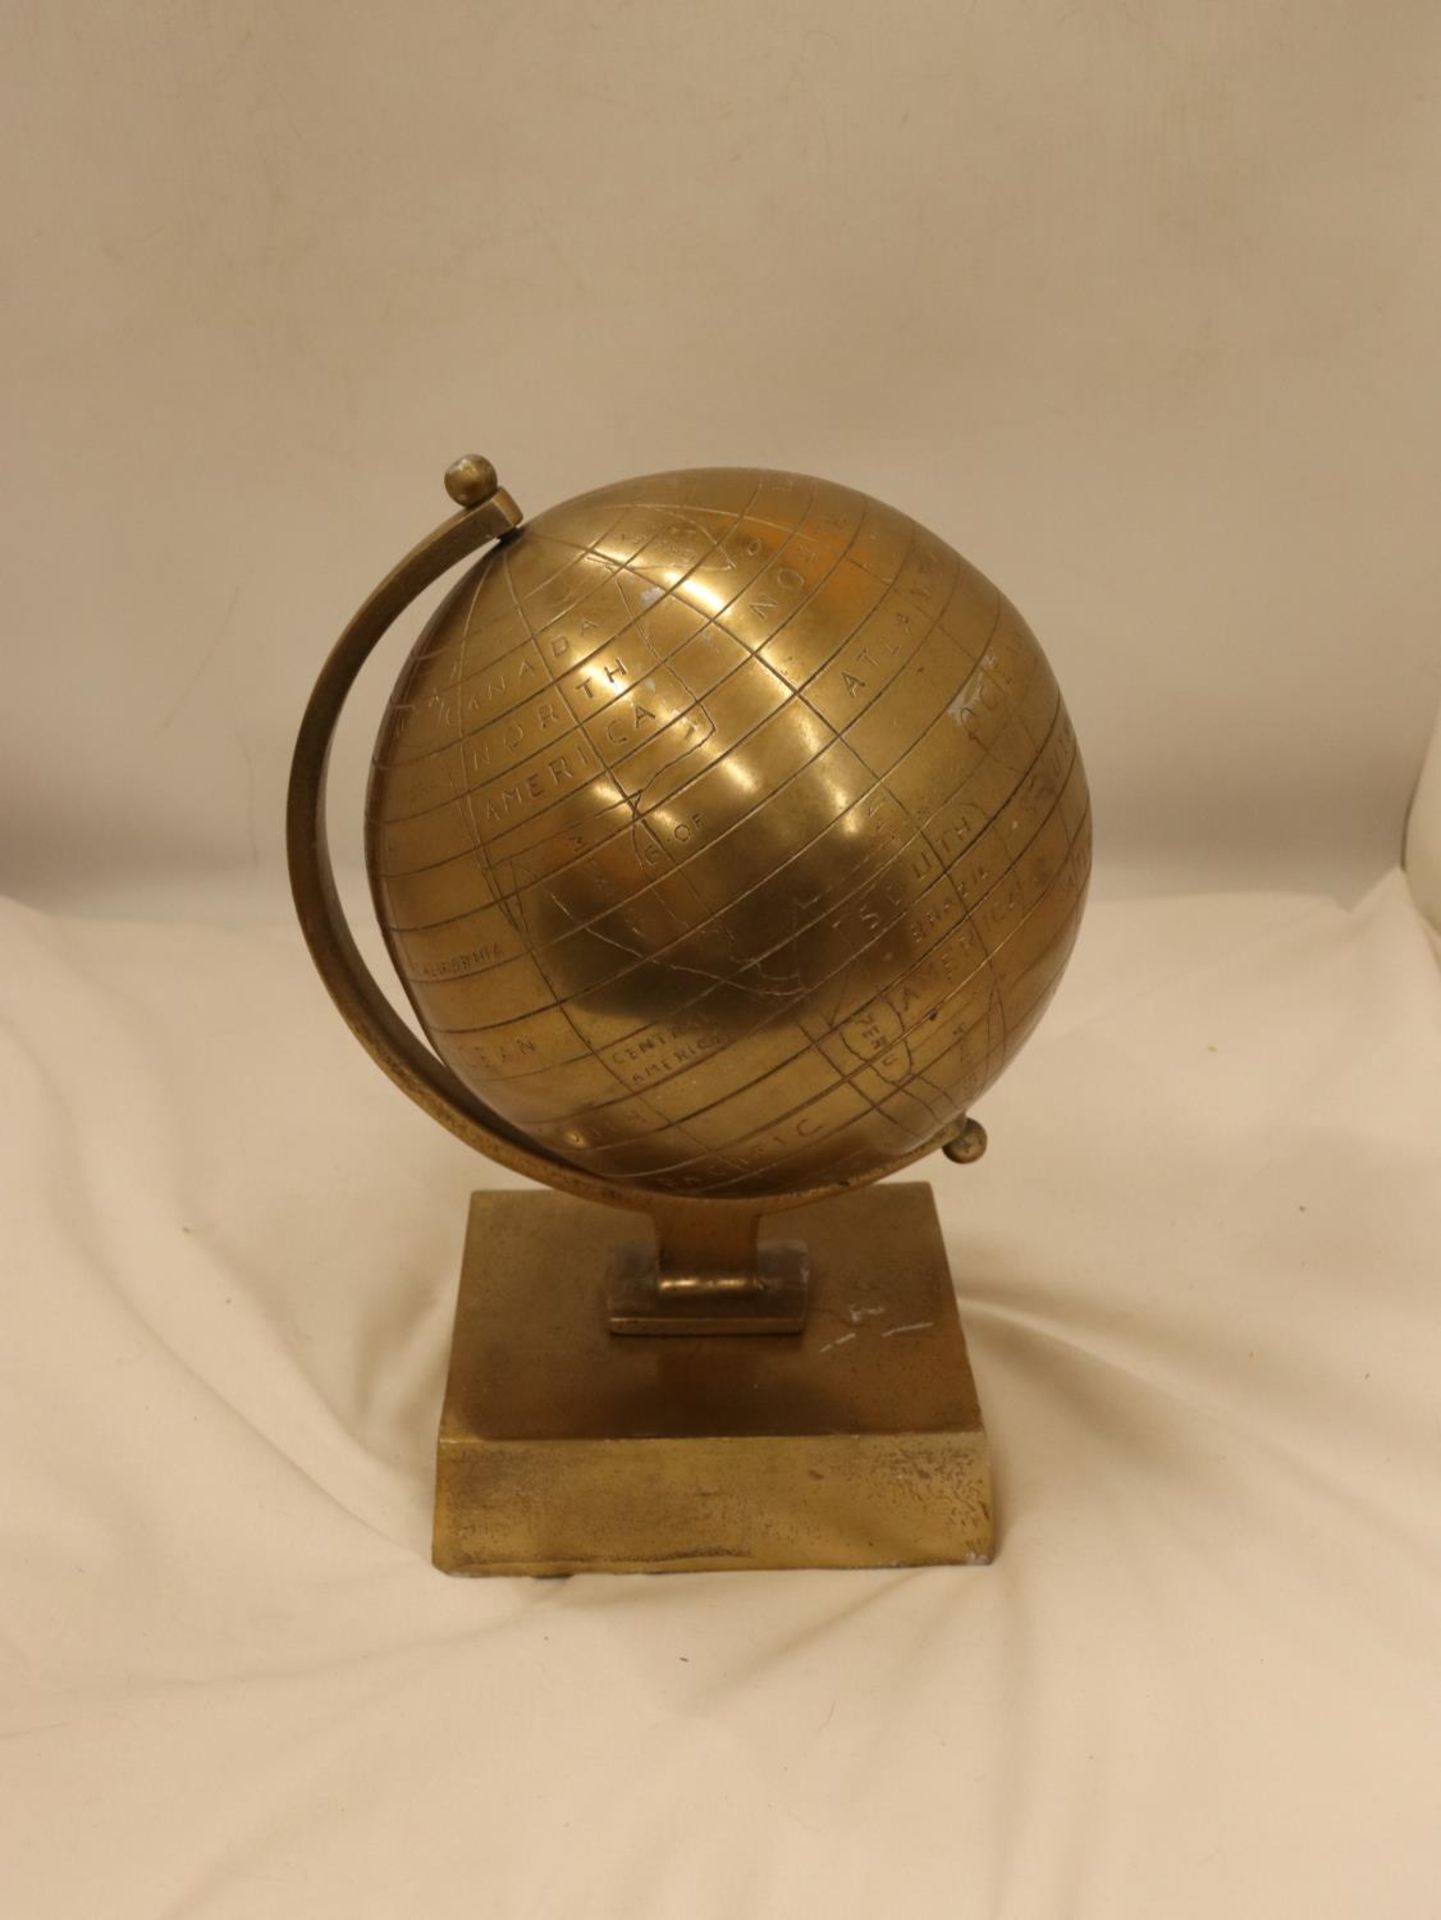 A HEAVY VINTAGE UNUSUAL BRASS GLOBE ON PEDESTAL, HEIGHT 30CM - Image 3 of 3